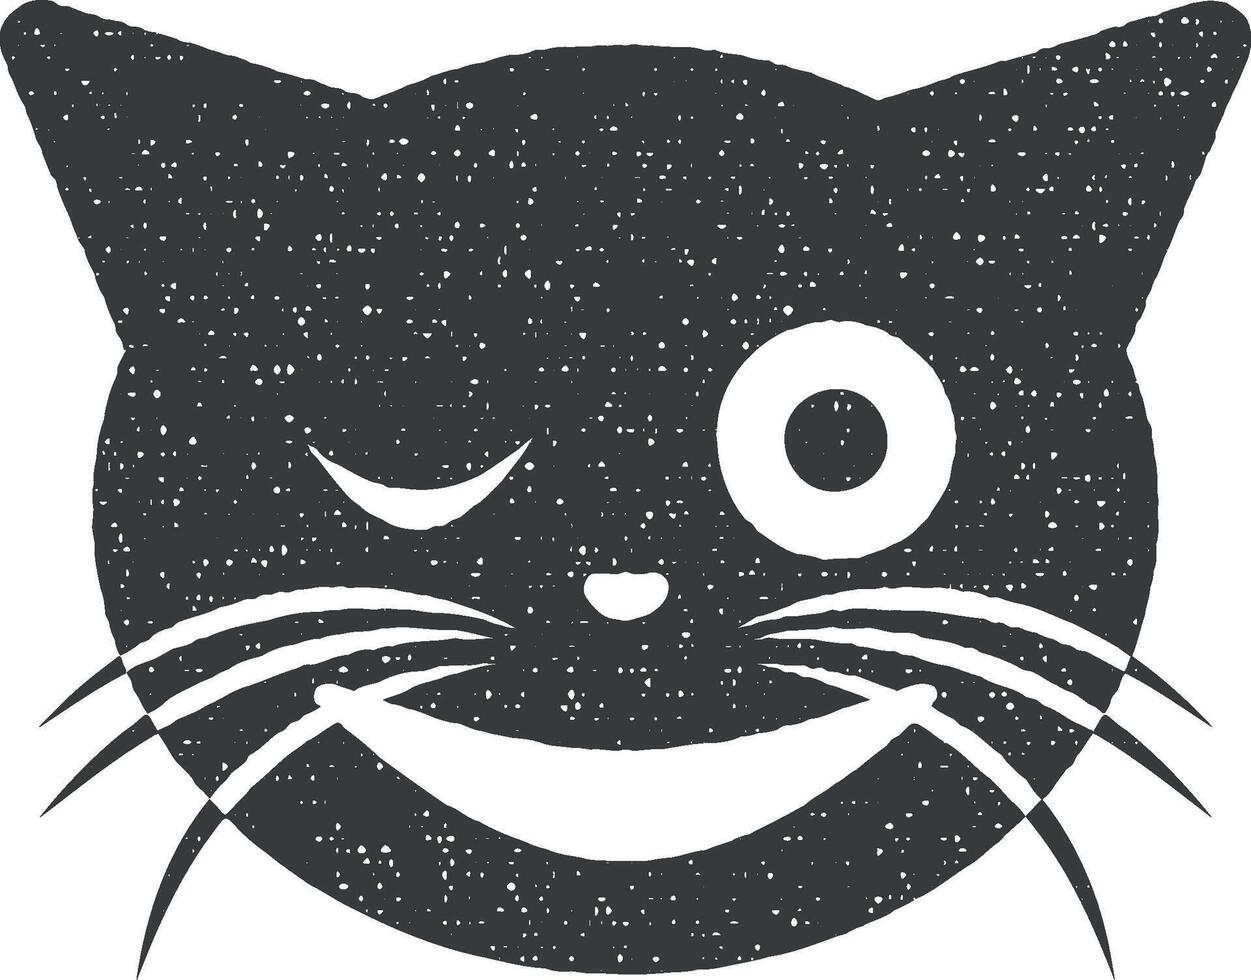 wink cat vector icon illustration with stamp effect